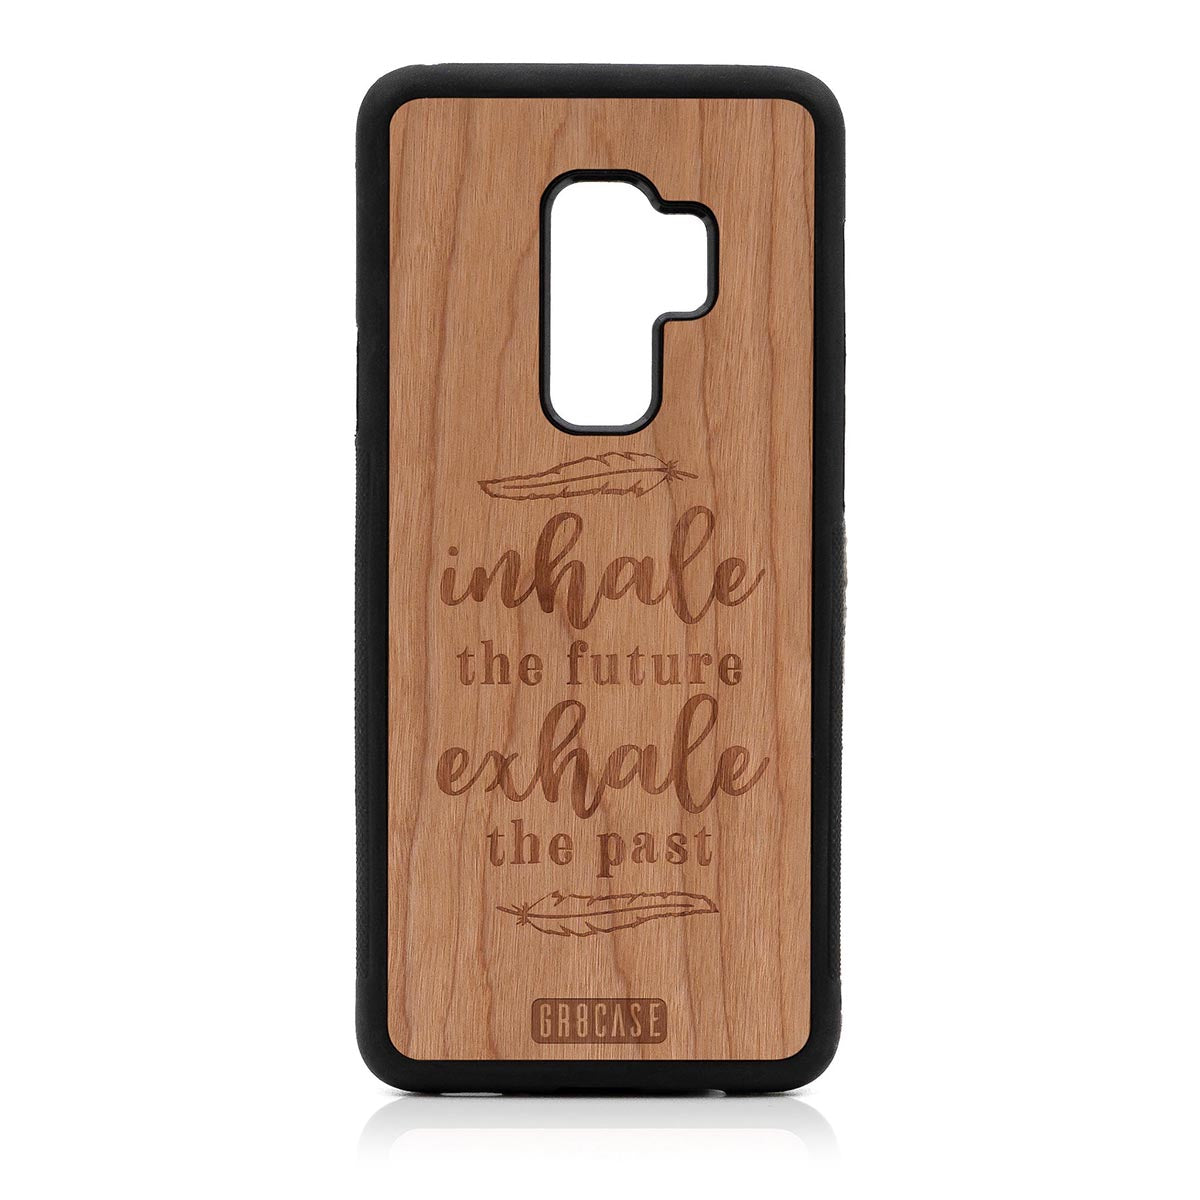 Inhale The Future Exhale The Past Design Wood Case Samsung Galaxy S9 Plus by GR8CASE